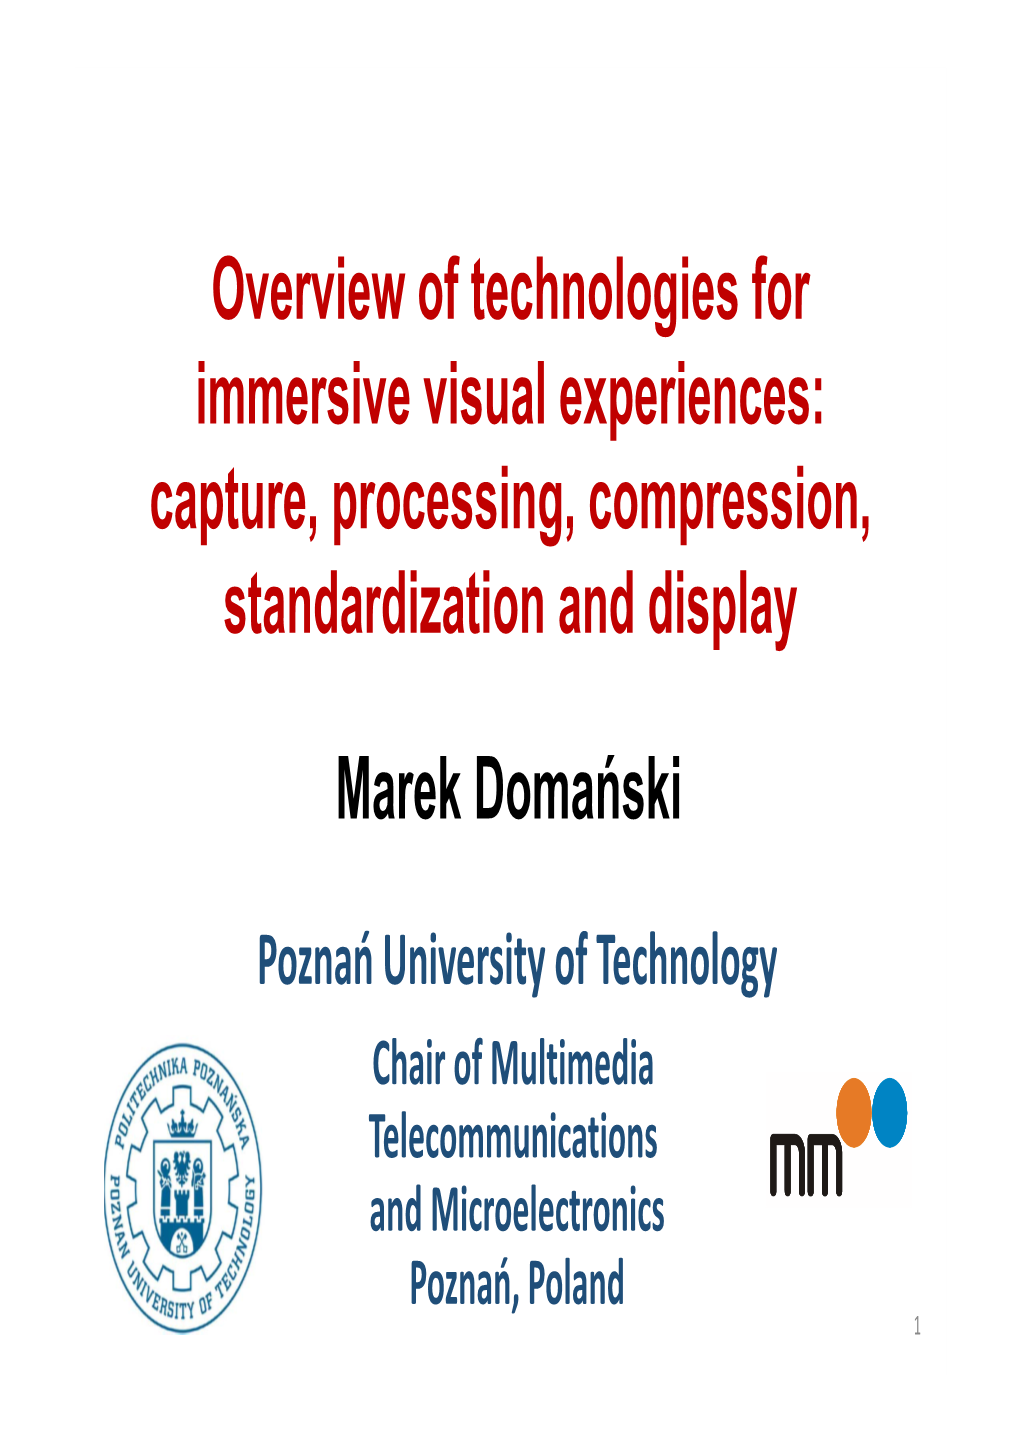 Overview of Technologies for Immersive Visual Experiences: Capture, Processing, Compression, Standardization and Display